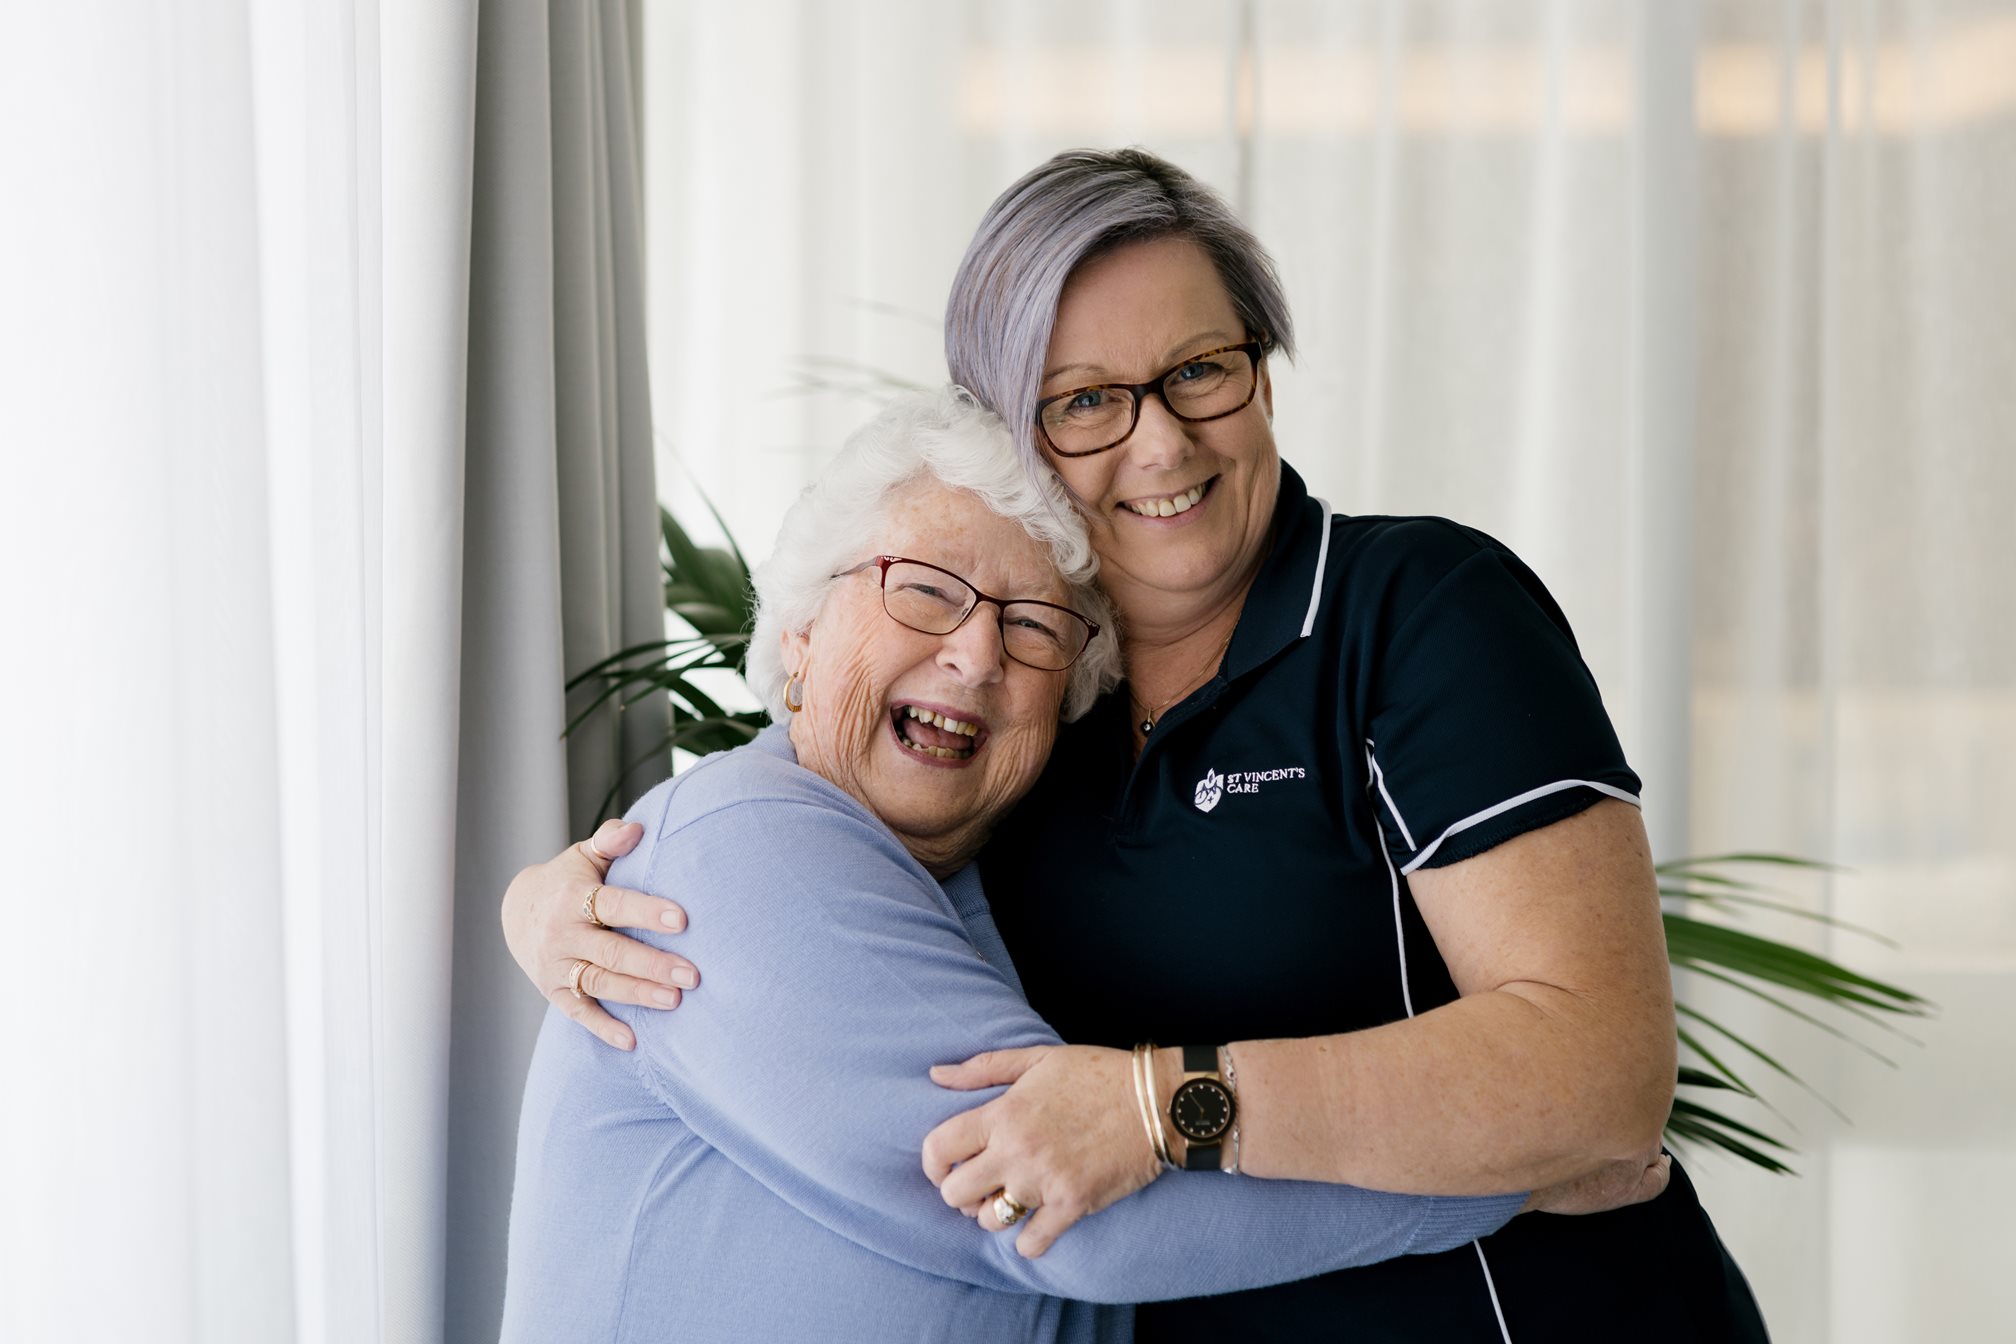 How to talk about aged care